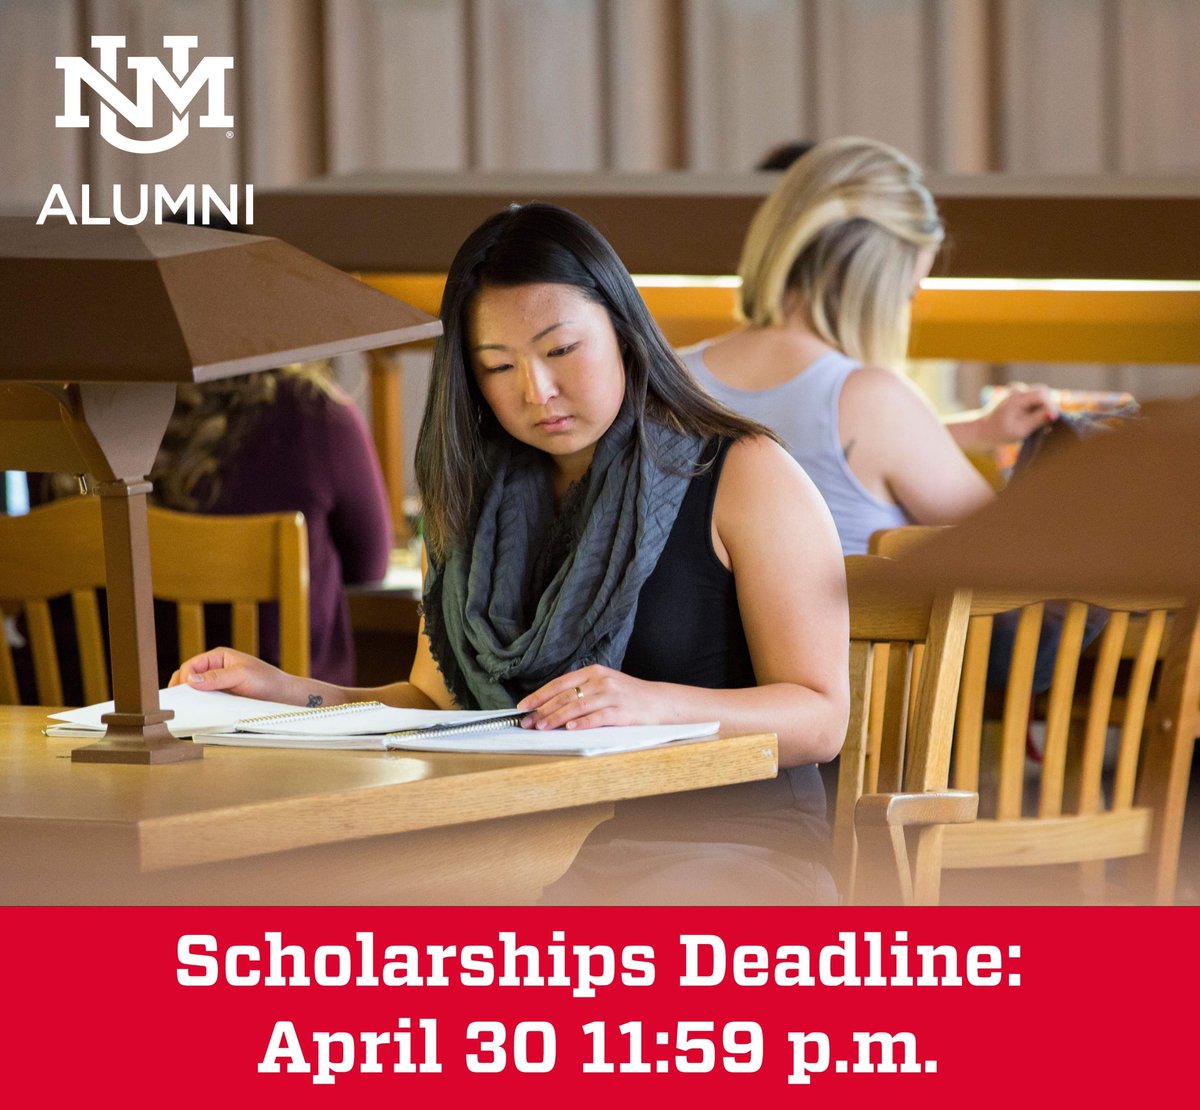 Attention Lobos! Don't miss out on the opportunity to apply for scholarships that can help fund your education. The deadline is only four days away! Take advantage of this amazing opportunity and invest in your future. #UNMScholarships unmalumni.com/s/1730/20/inte…